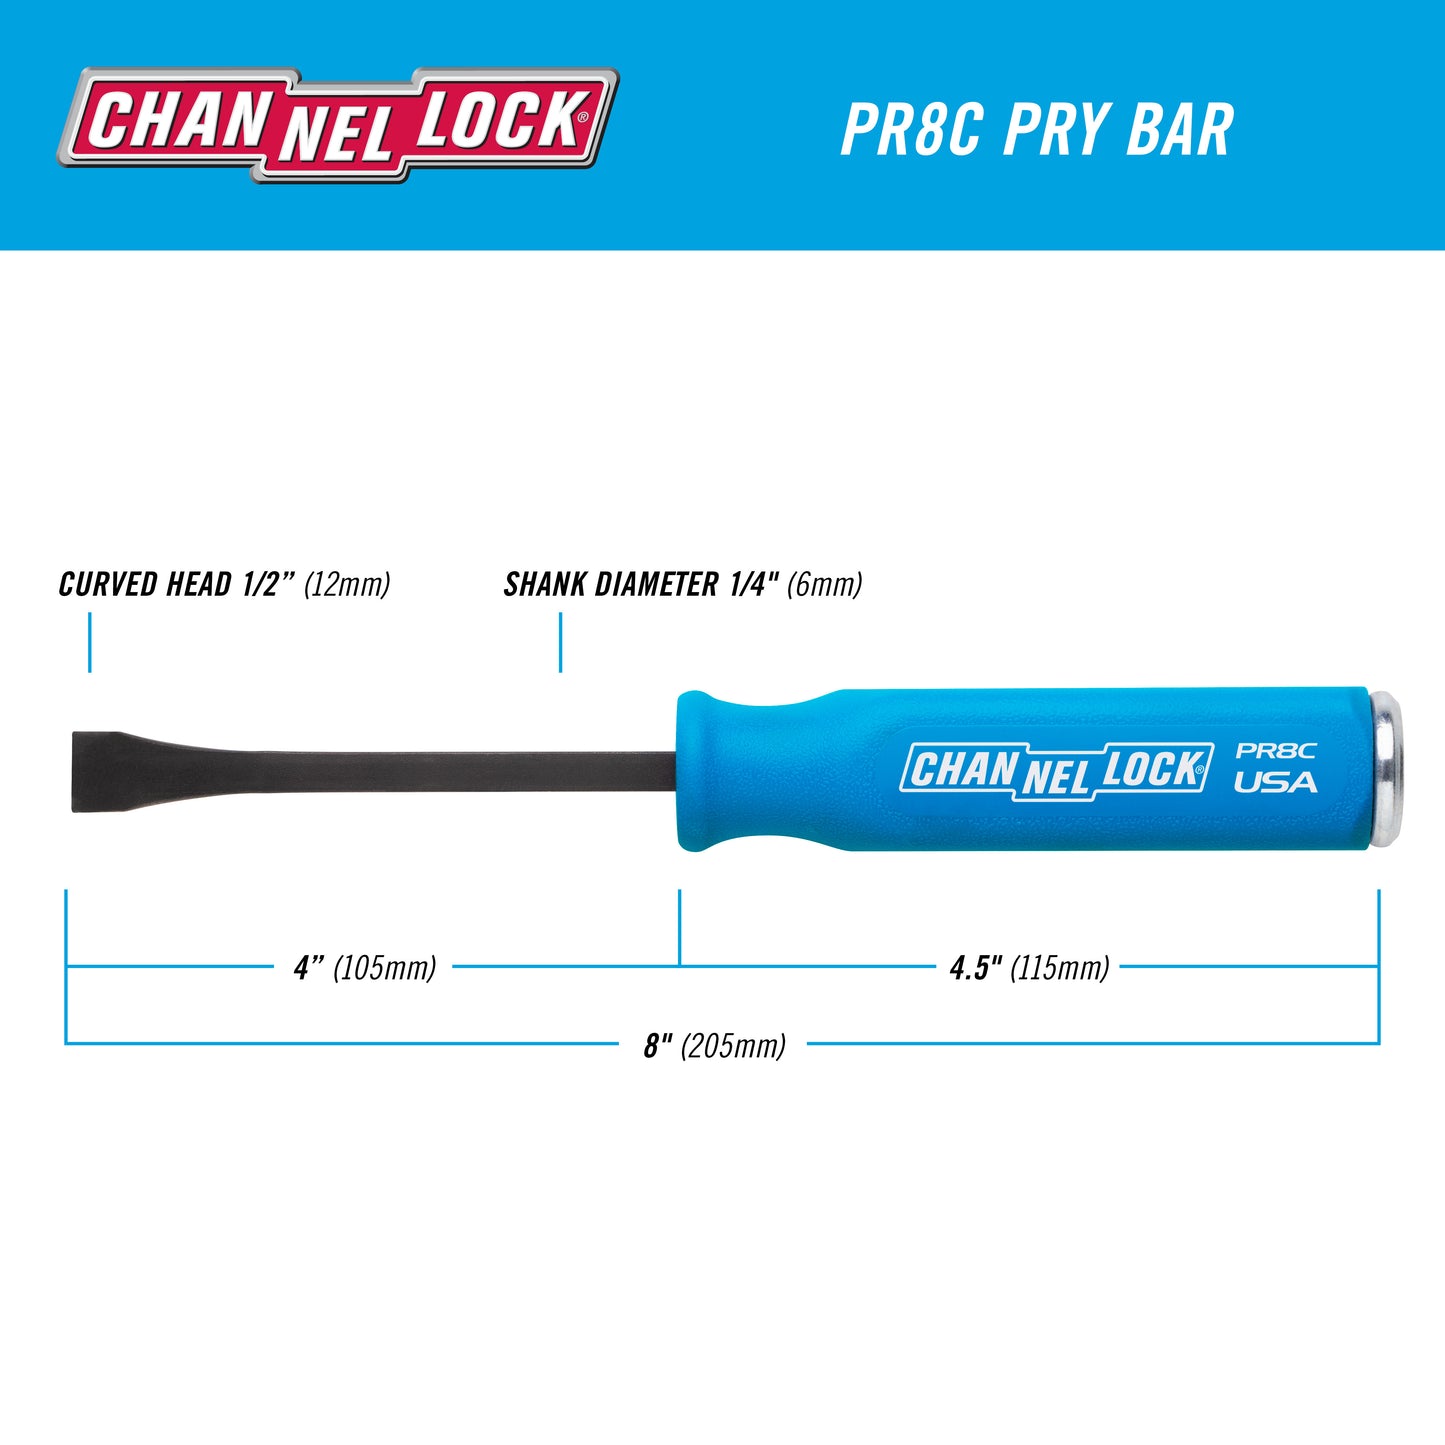 1/4 x 4-inch Professional Pry Bar, 8-inch Overall Length (PR8C)